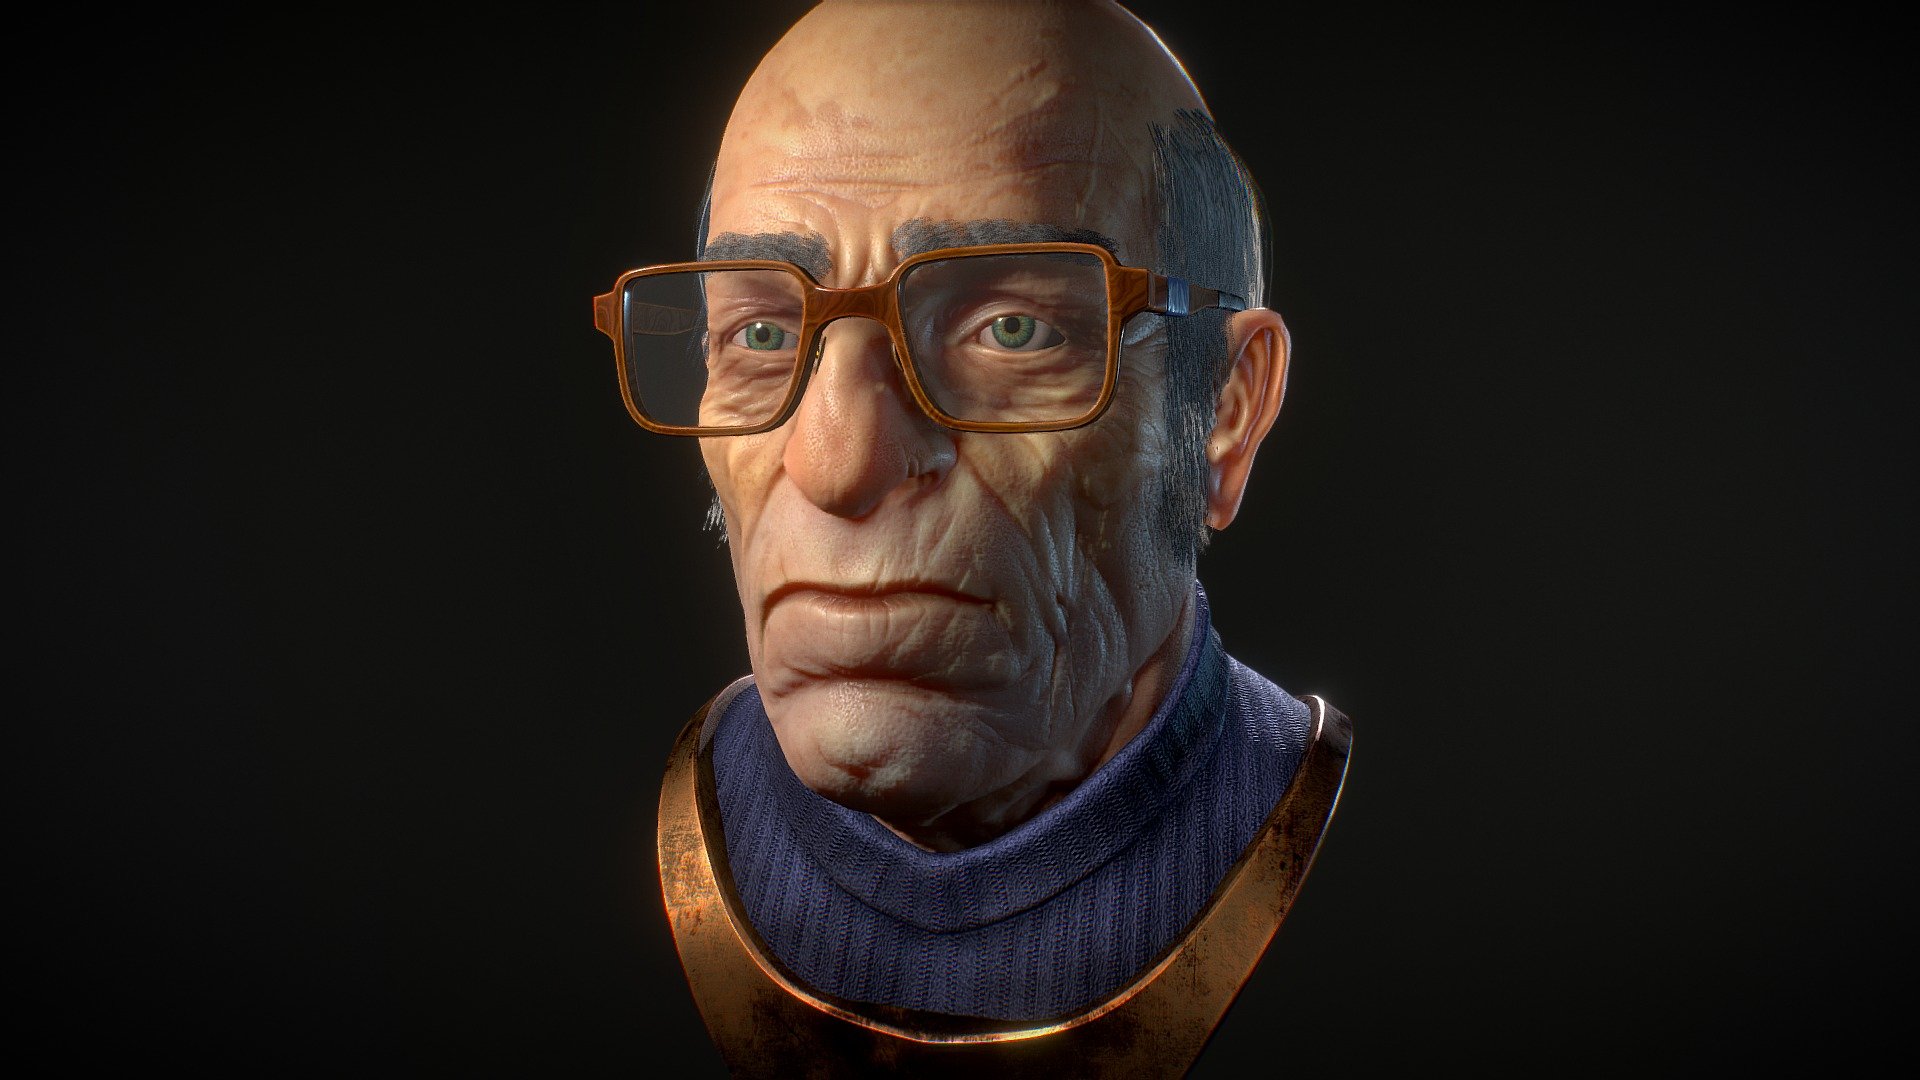 Inspired by the stories of Arkadiy and Boris Strugatsky. Sculpting, retopo, UV unwrapping and texturing made in 3d-coat. Looking glasses made in 3d max, hair made in Maya.
 https://www.artstation.com/artwork/gLREG
 Model in store:
 -link removed- - Old man - 3D model by Dmitriy Dryzhak (@arvart.lit) 3d model